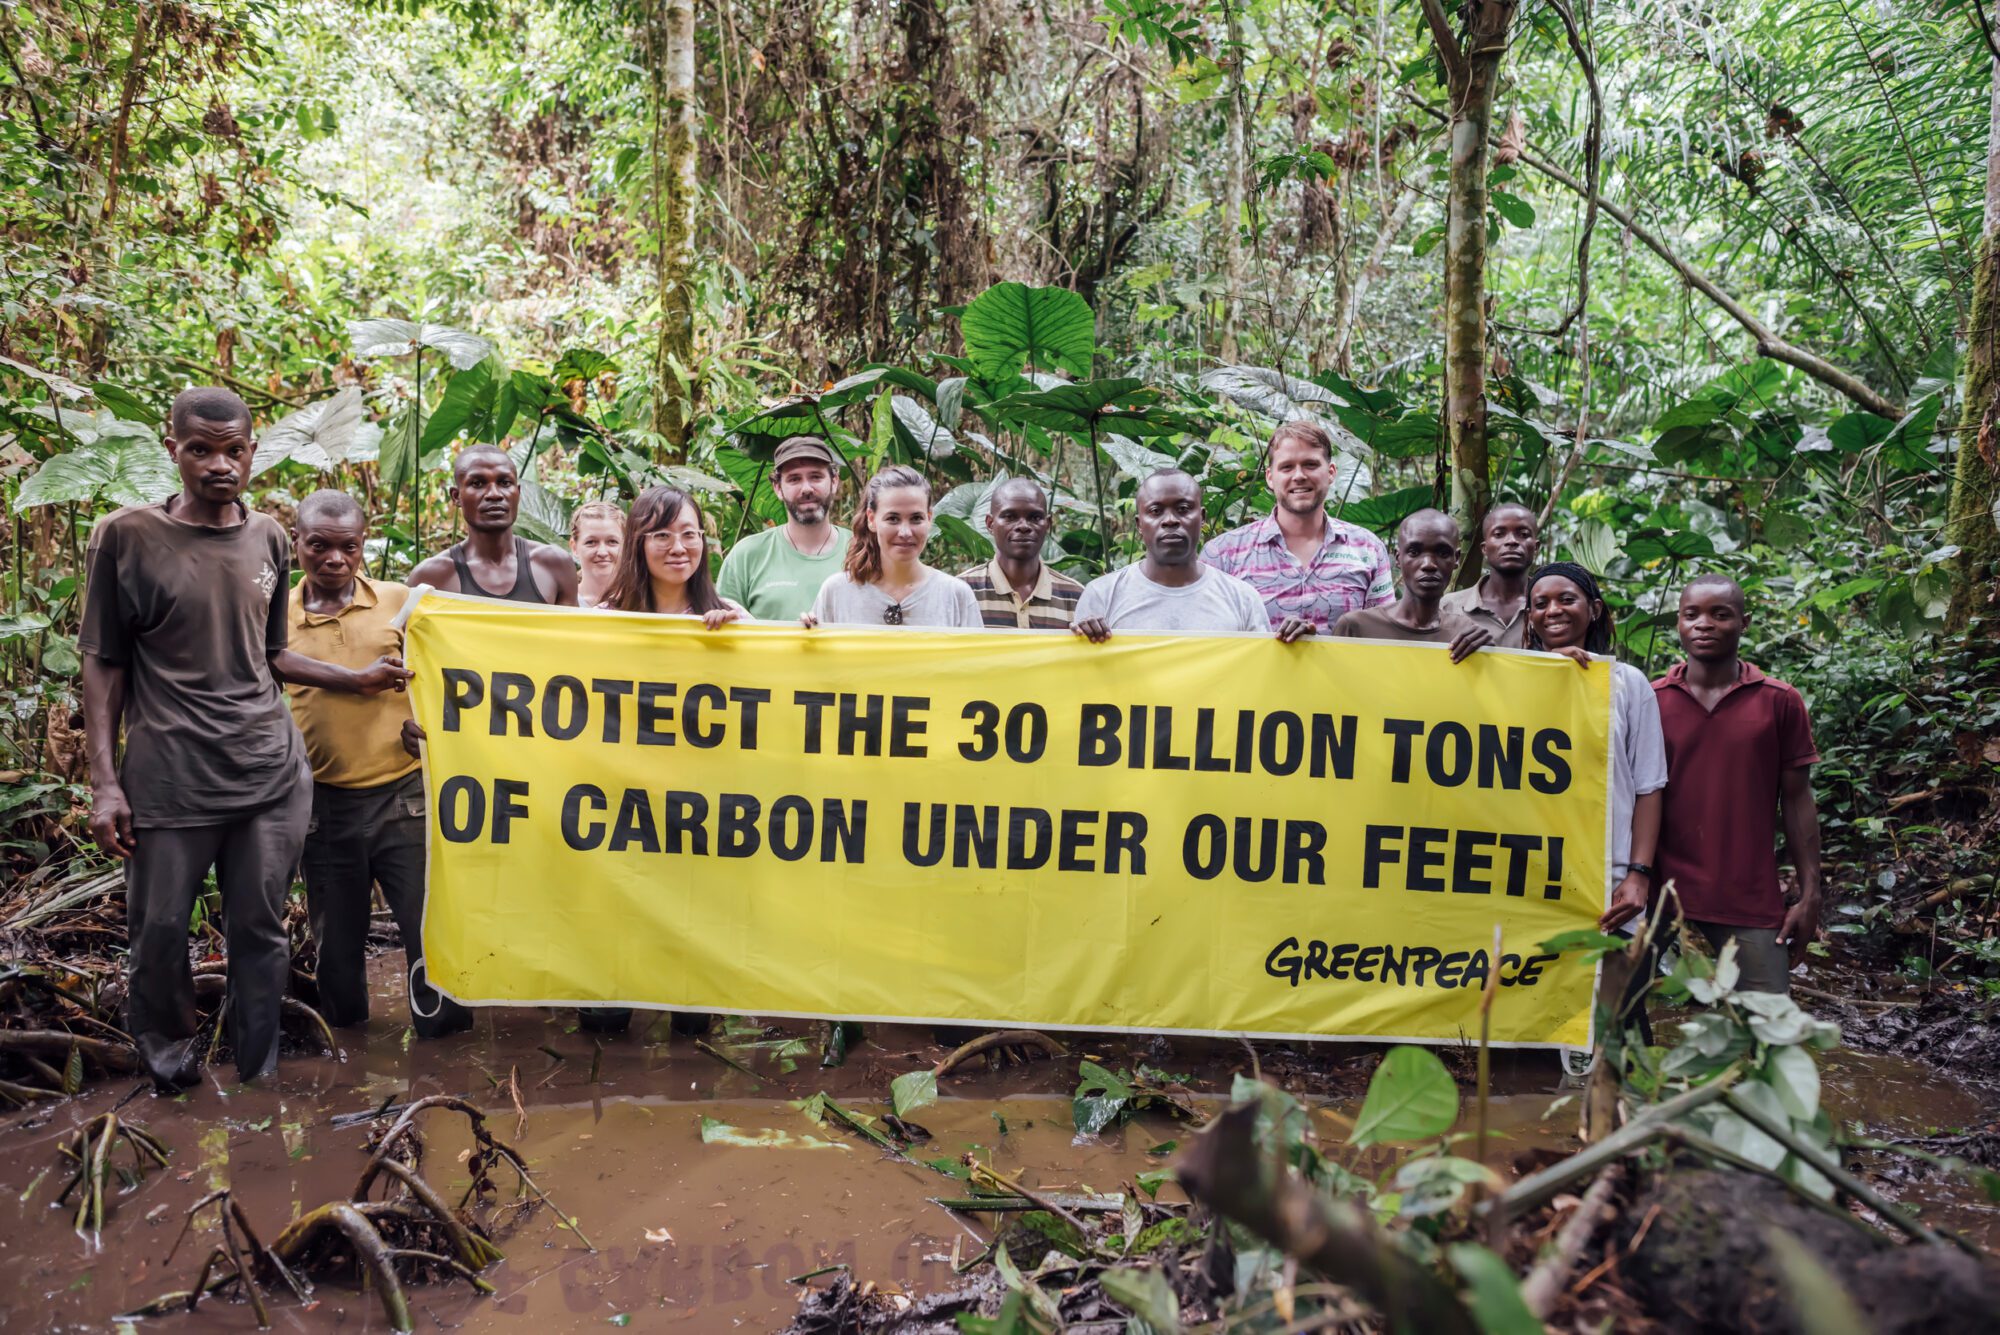 Group of people in a wetland forest hold a banner saying "Protect the 30 billion tons of carbon under our feet!"